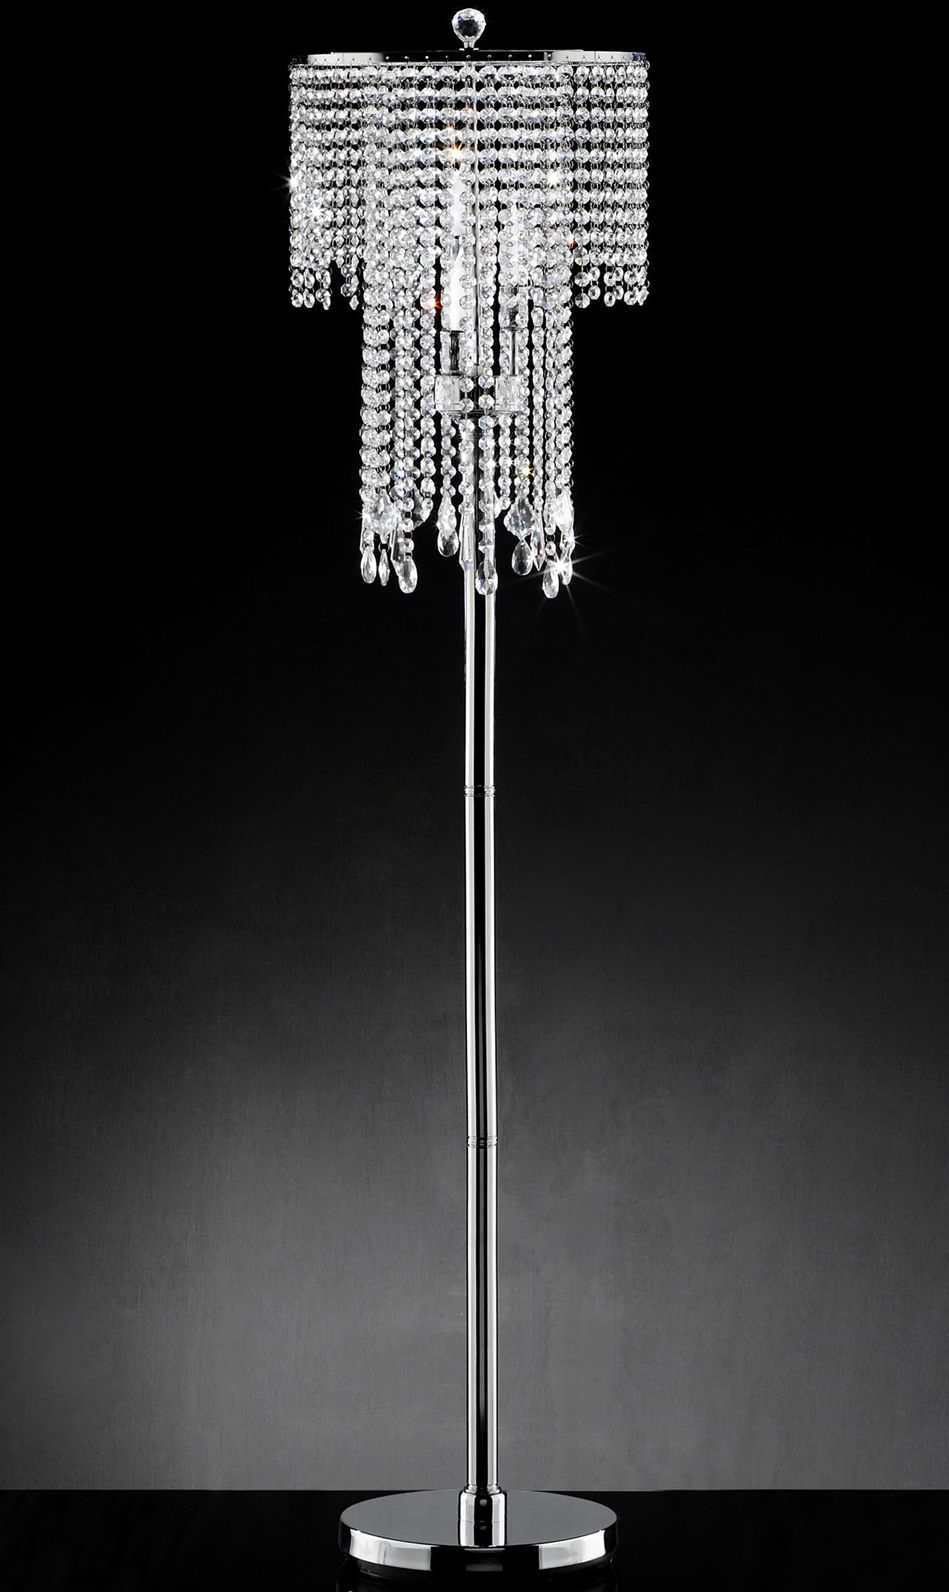 Fantasy Real Crystal Floor Lamp 14lx14wx63h with regard to sizing 949 X 1592